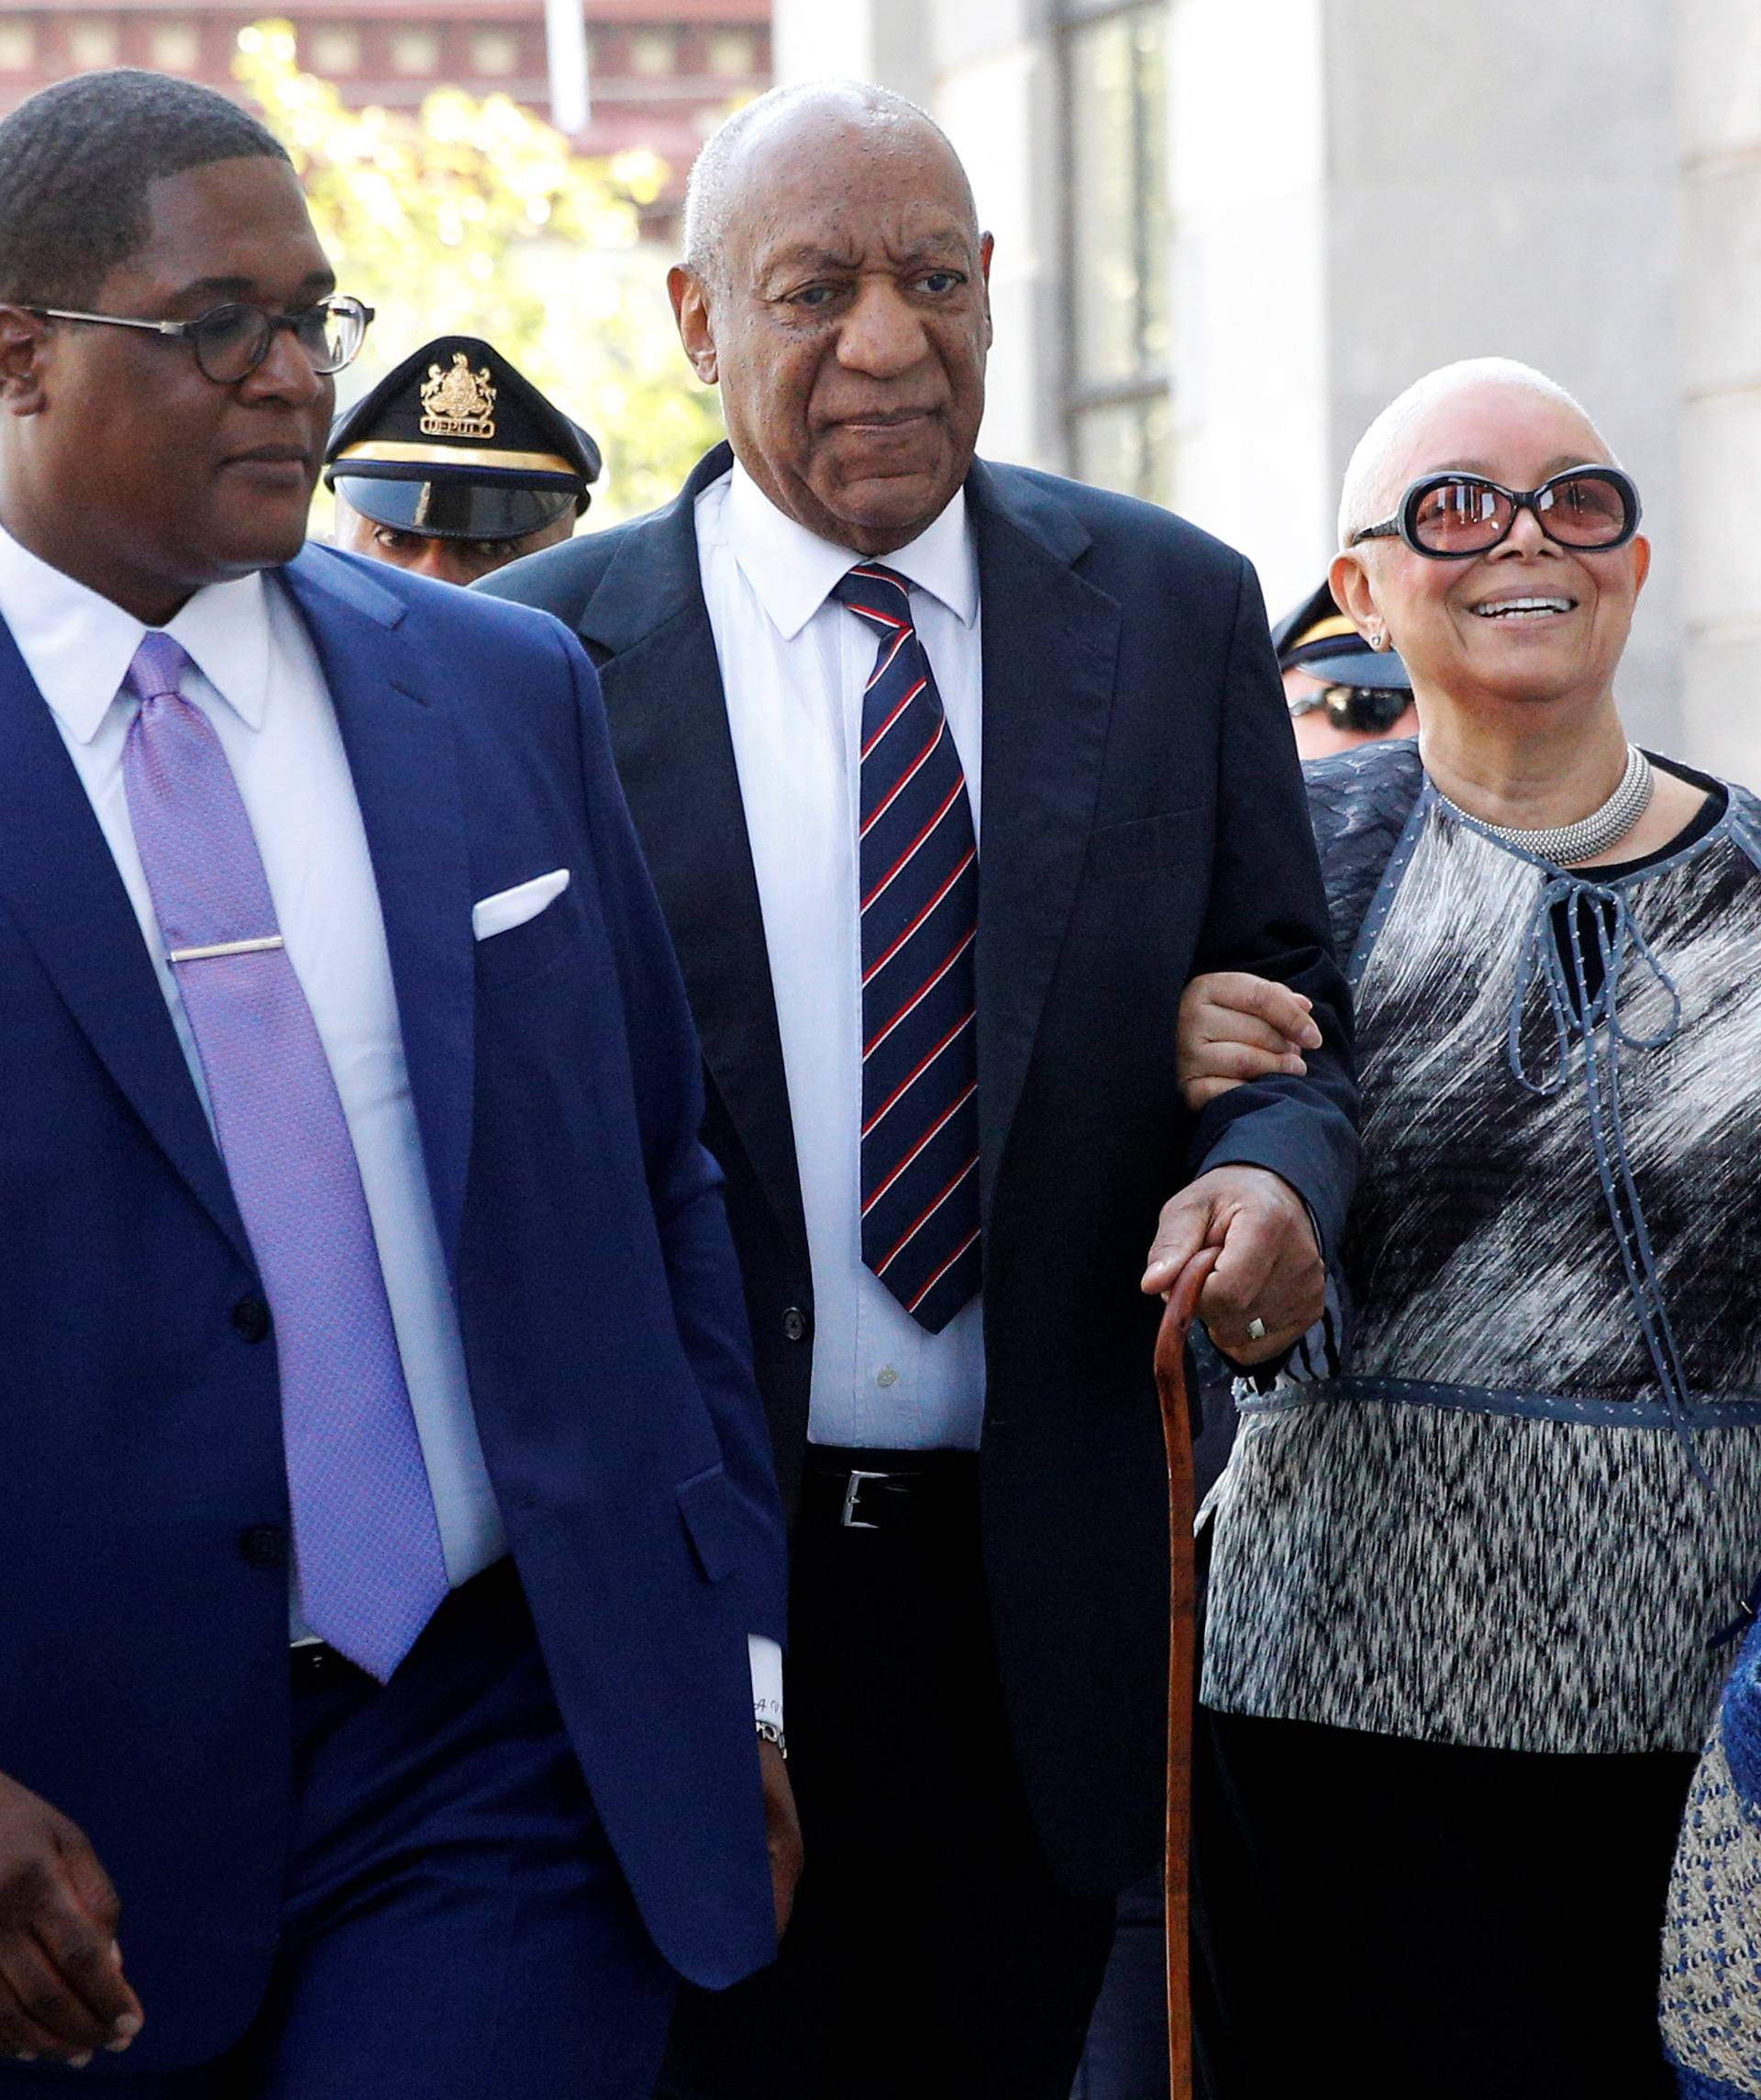 Actor and comedian Bill Cosby arrives with his wife Camille for the sixth day of his sexual assault trial at the Montgomery County Courthouse in Norristown